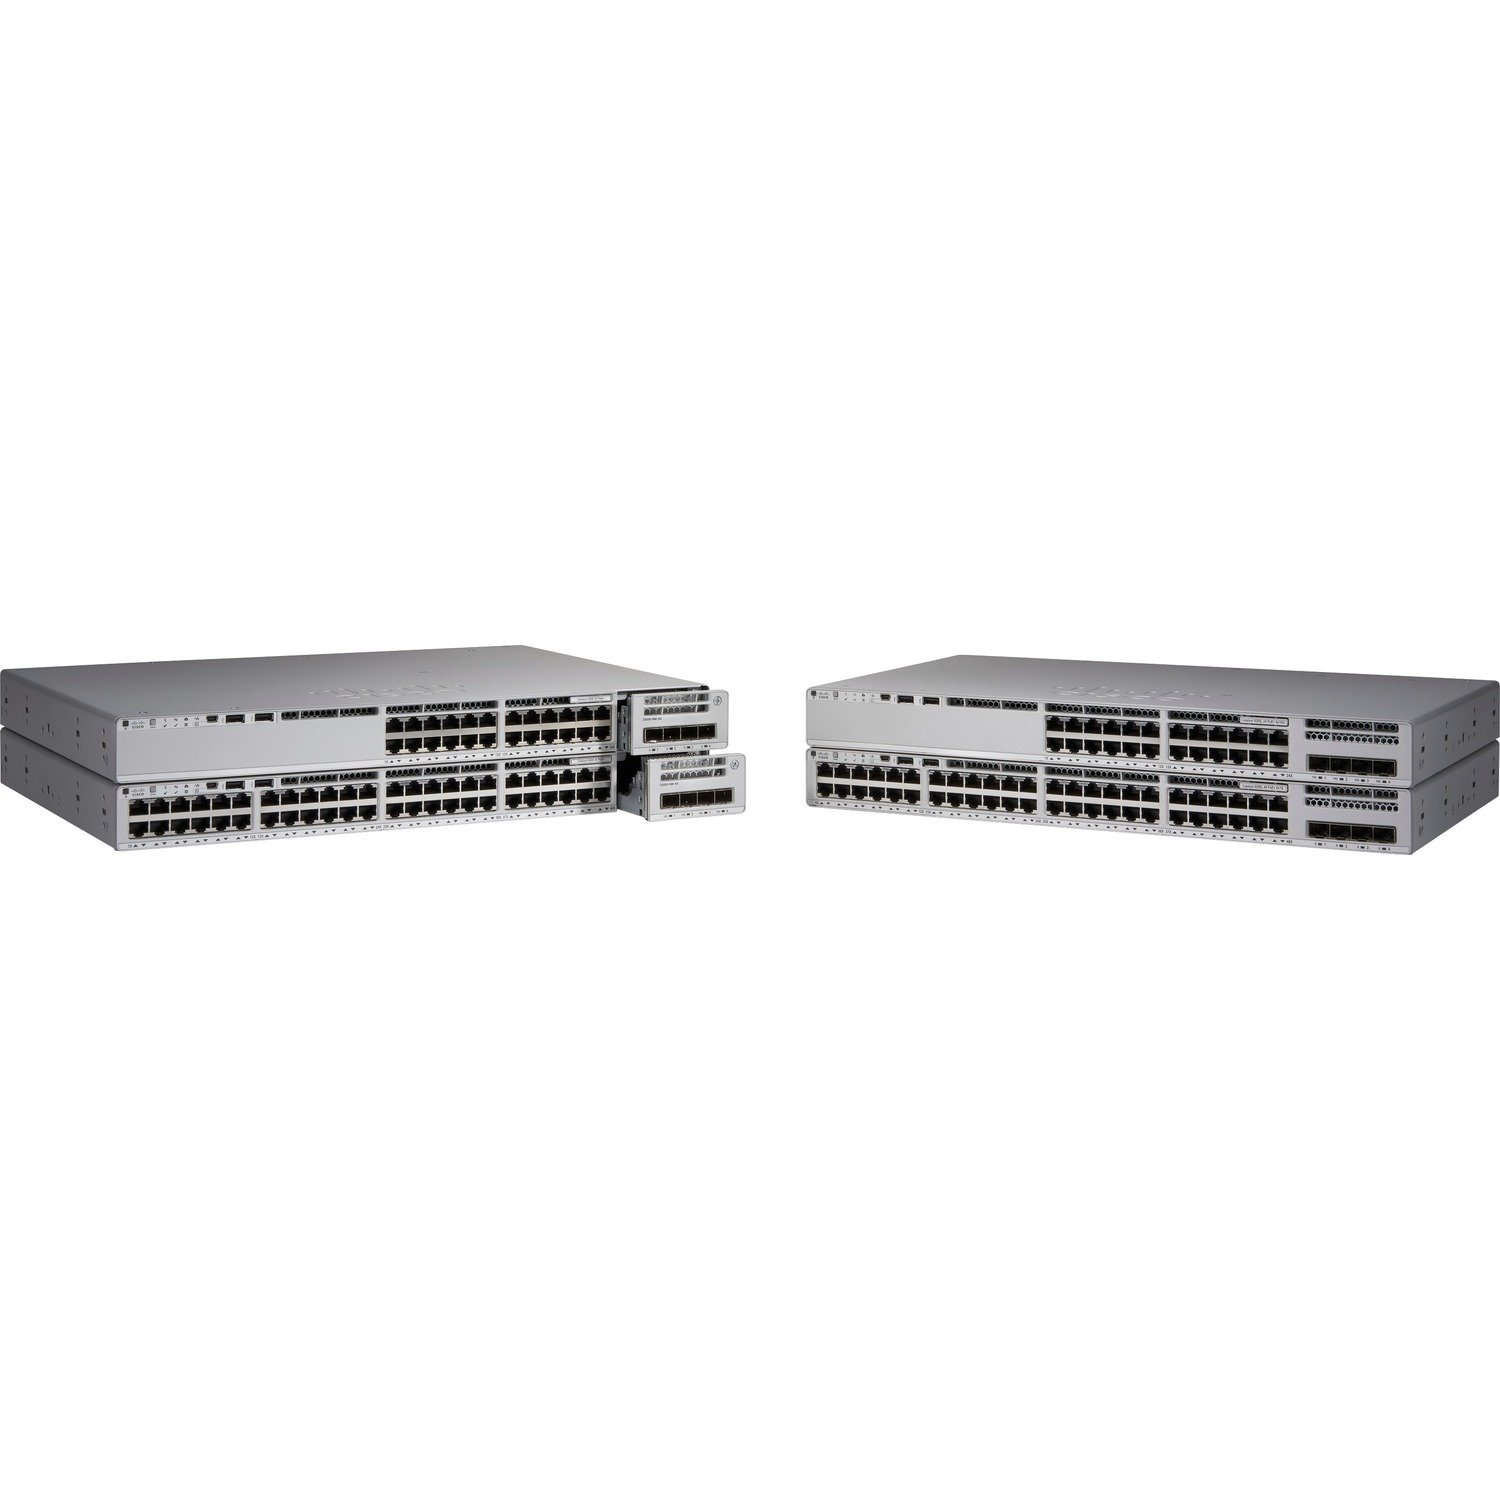 Cisco Catalyst 9200 C9200L-48PXG-4X 48 Ports Manageable Ethernet Switch - Gigabit Ethernet, 10 Gigabit Ethernet - 10/100/1000Base-T, 10GBase-T